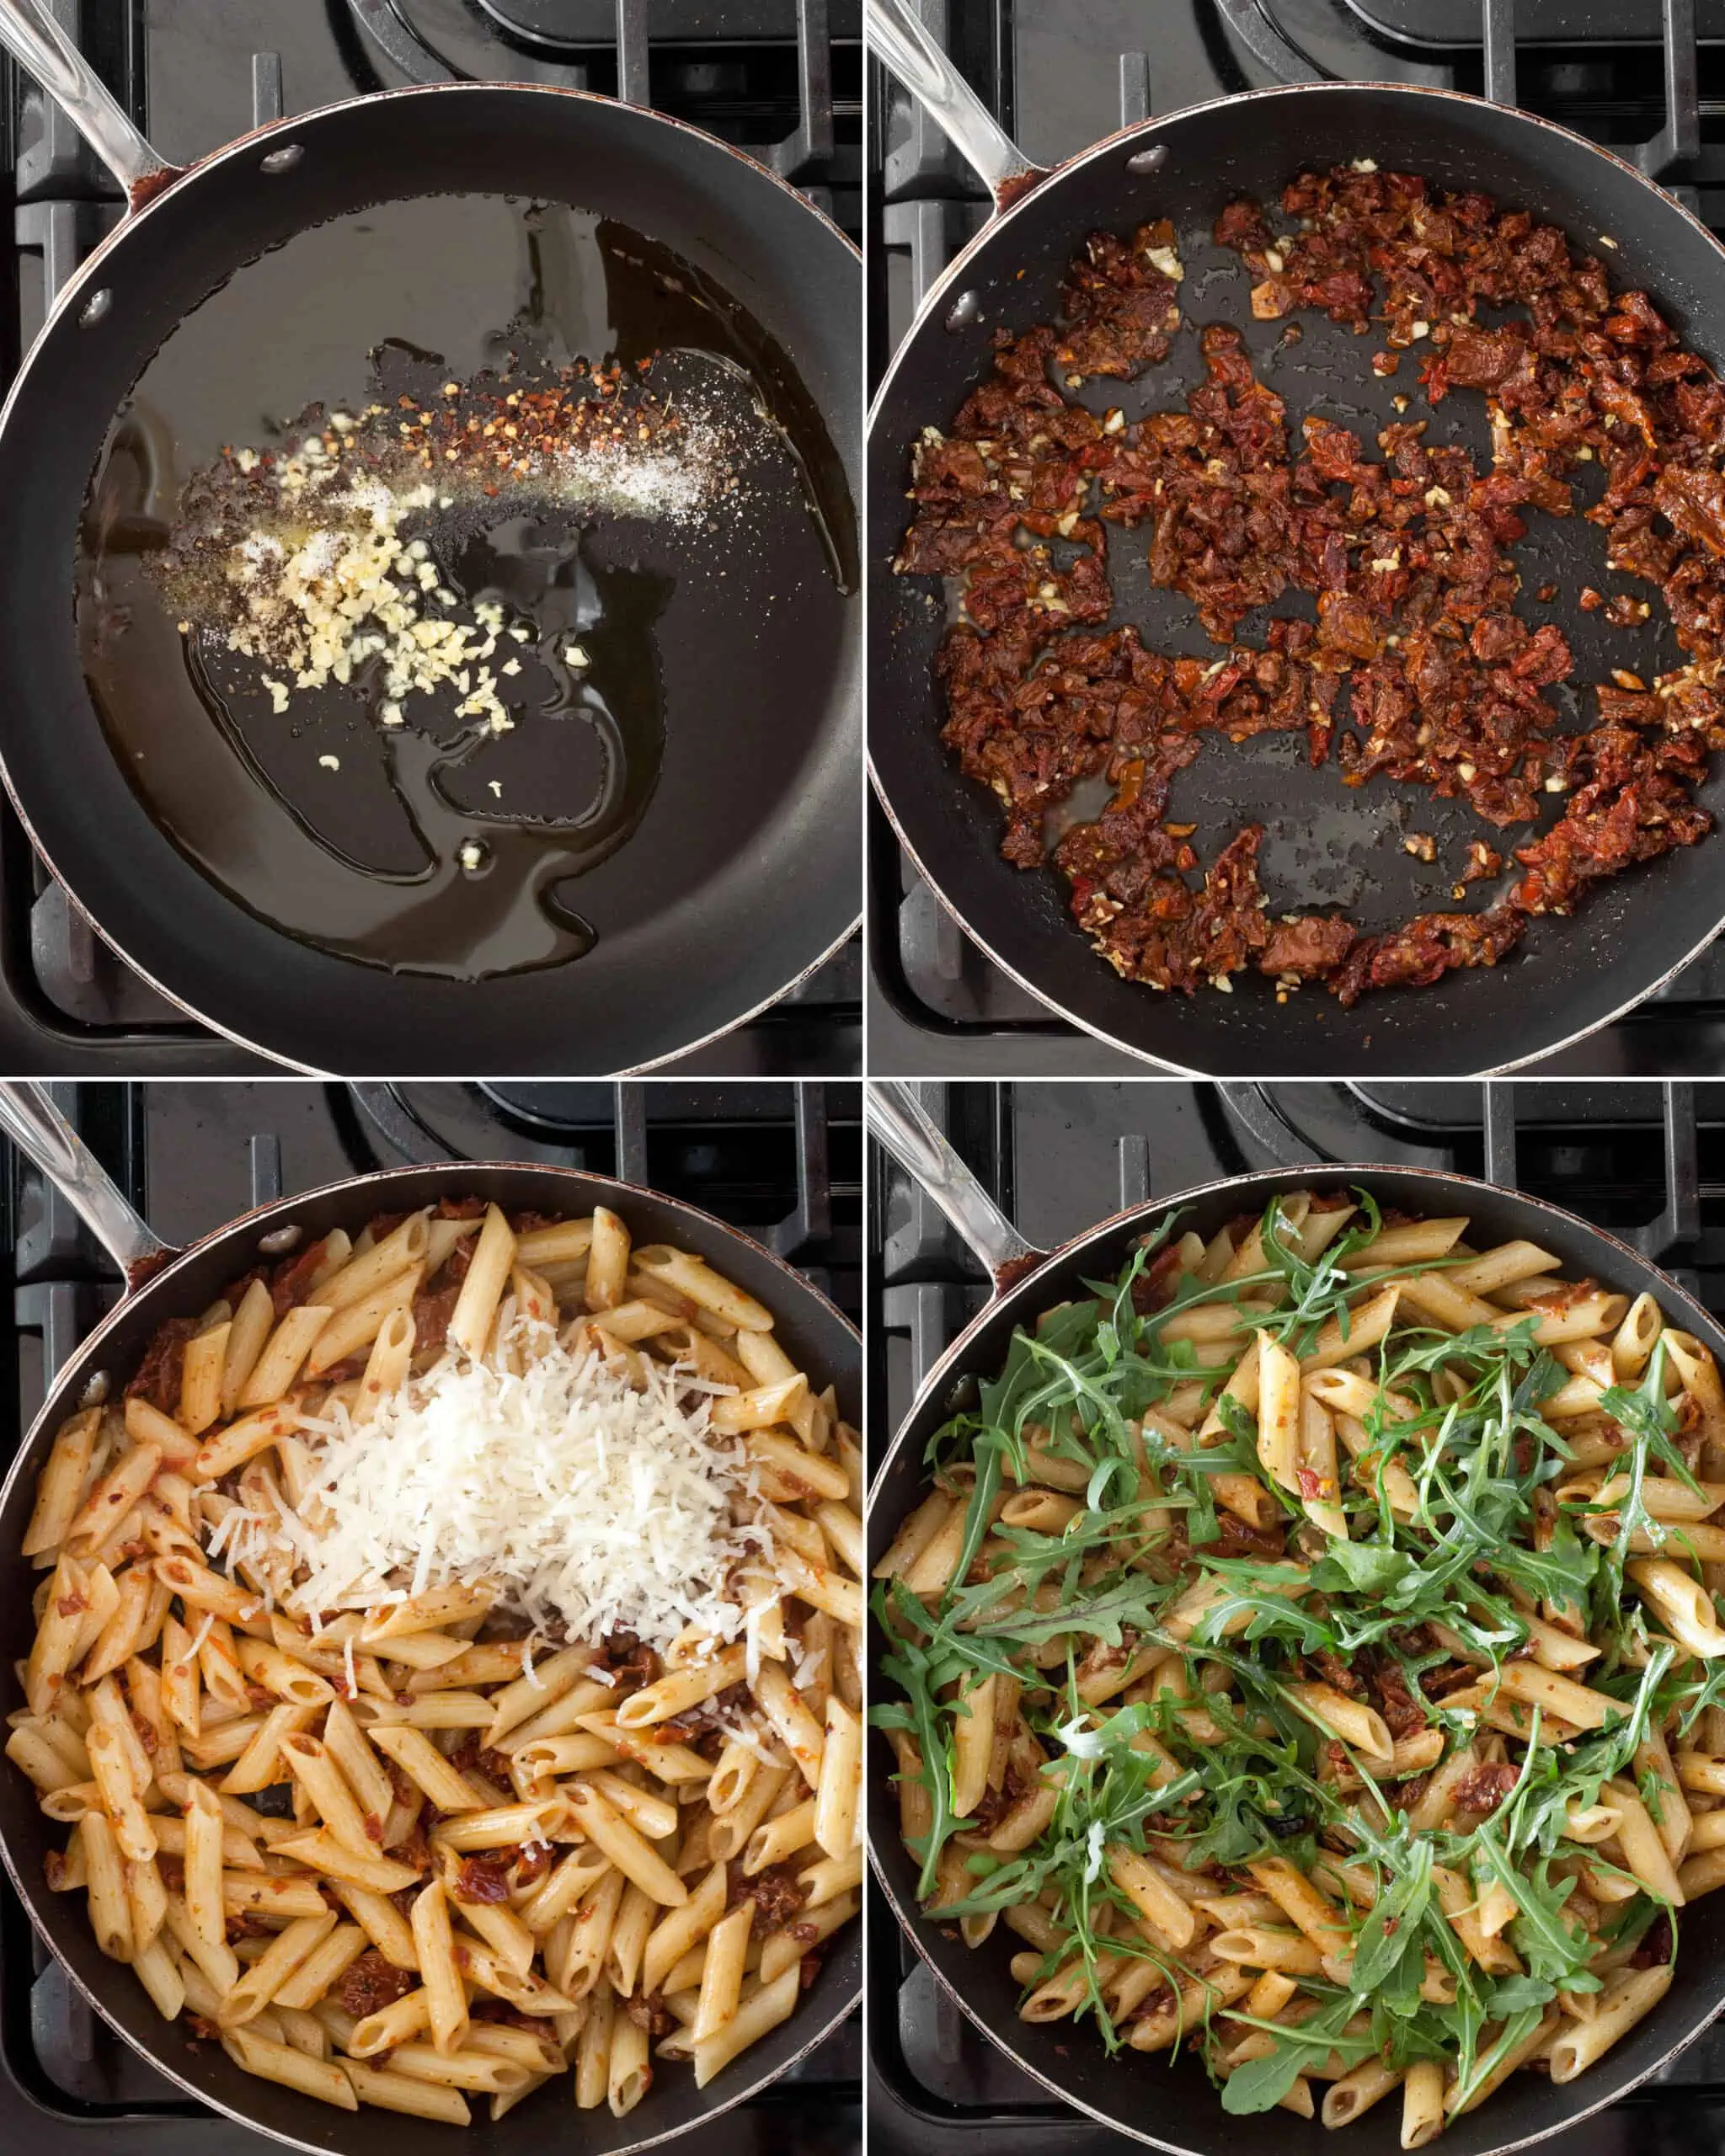 Steps showing how to make pasta with sun dried tomatoes, parmesan and arugula on the stove top